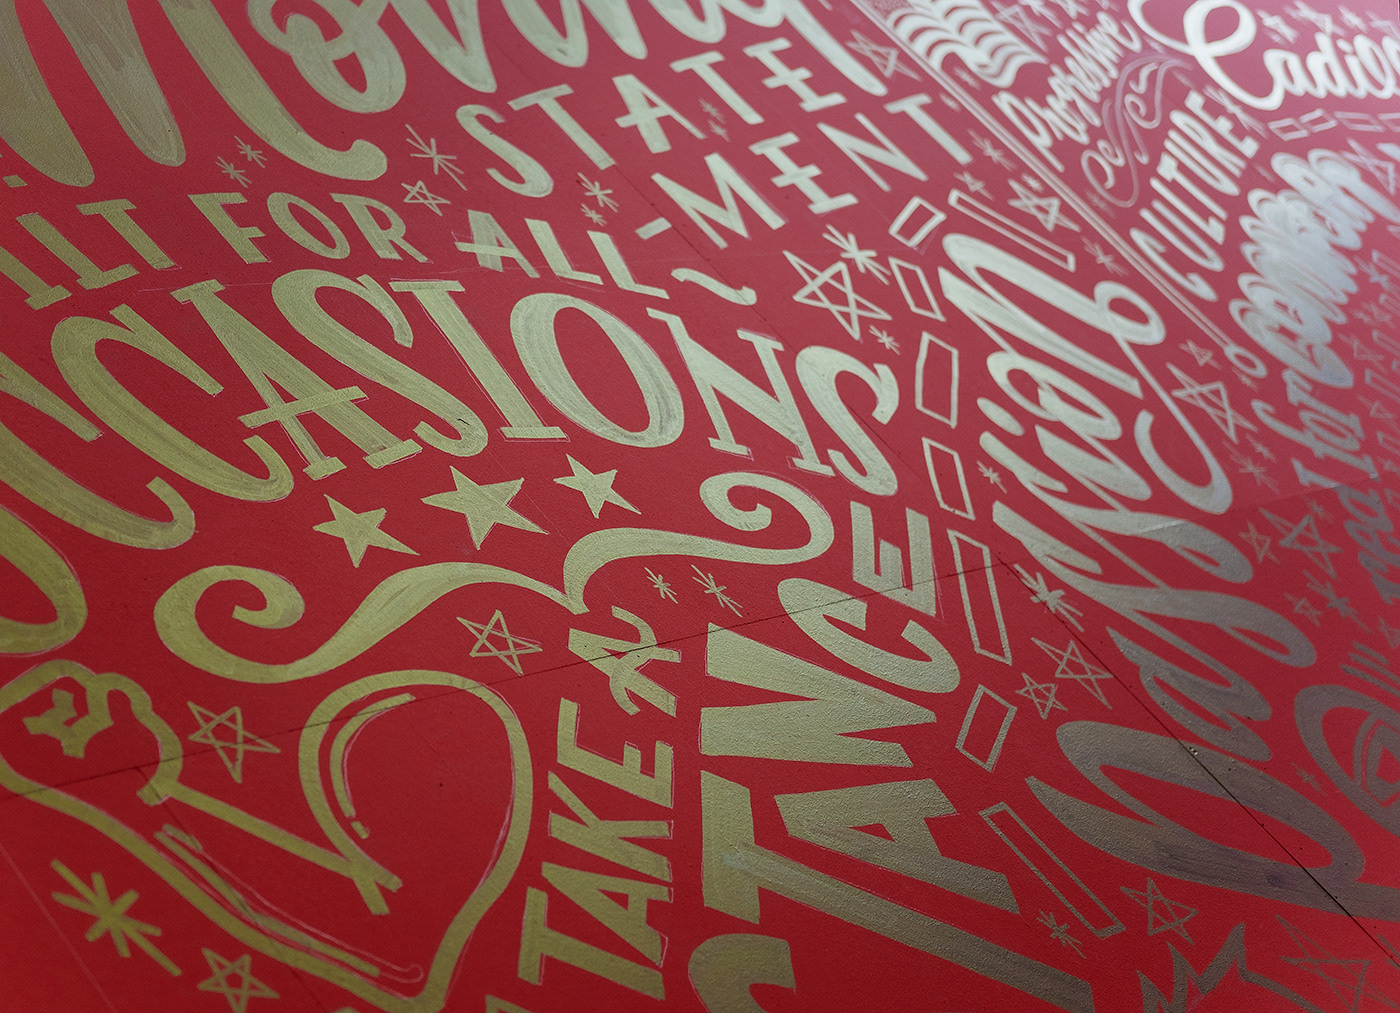 Mural lettering cadillac type HAND LETTERING ILLUSTRATION  car dare greatly process timelapse